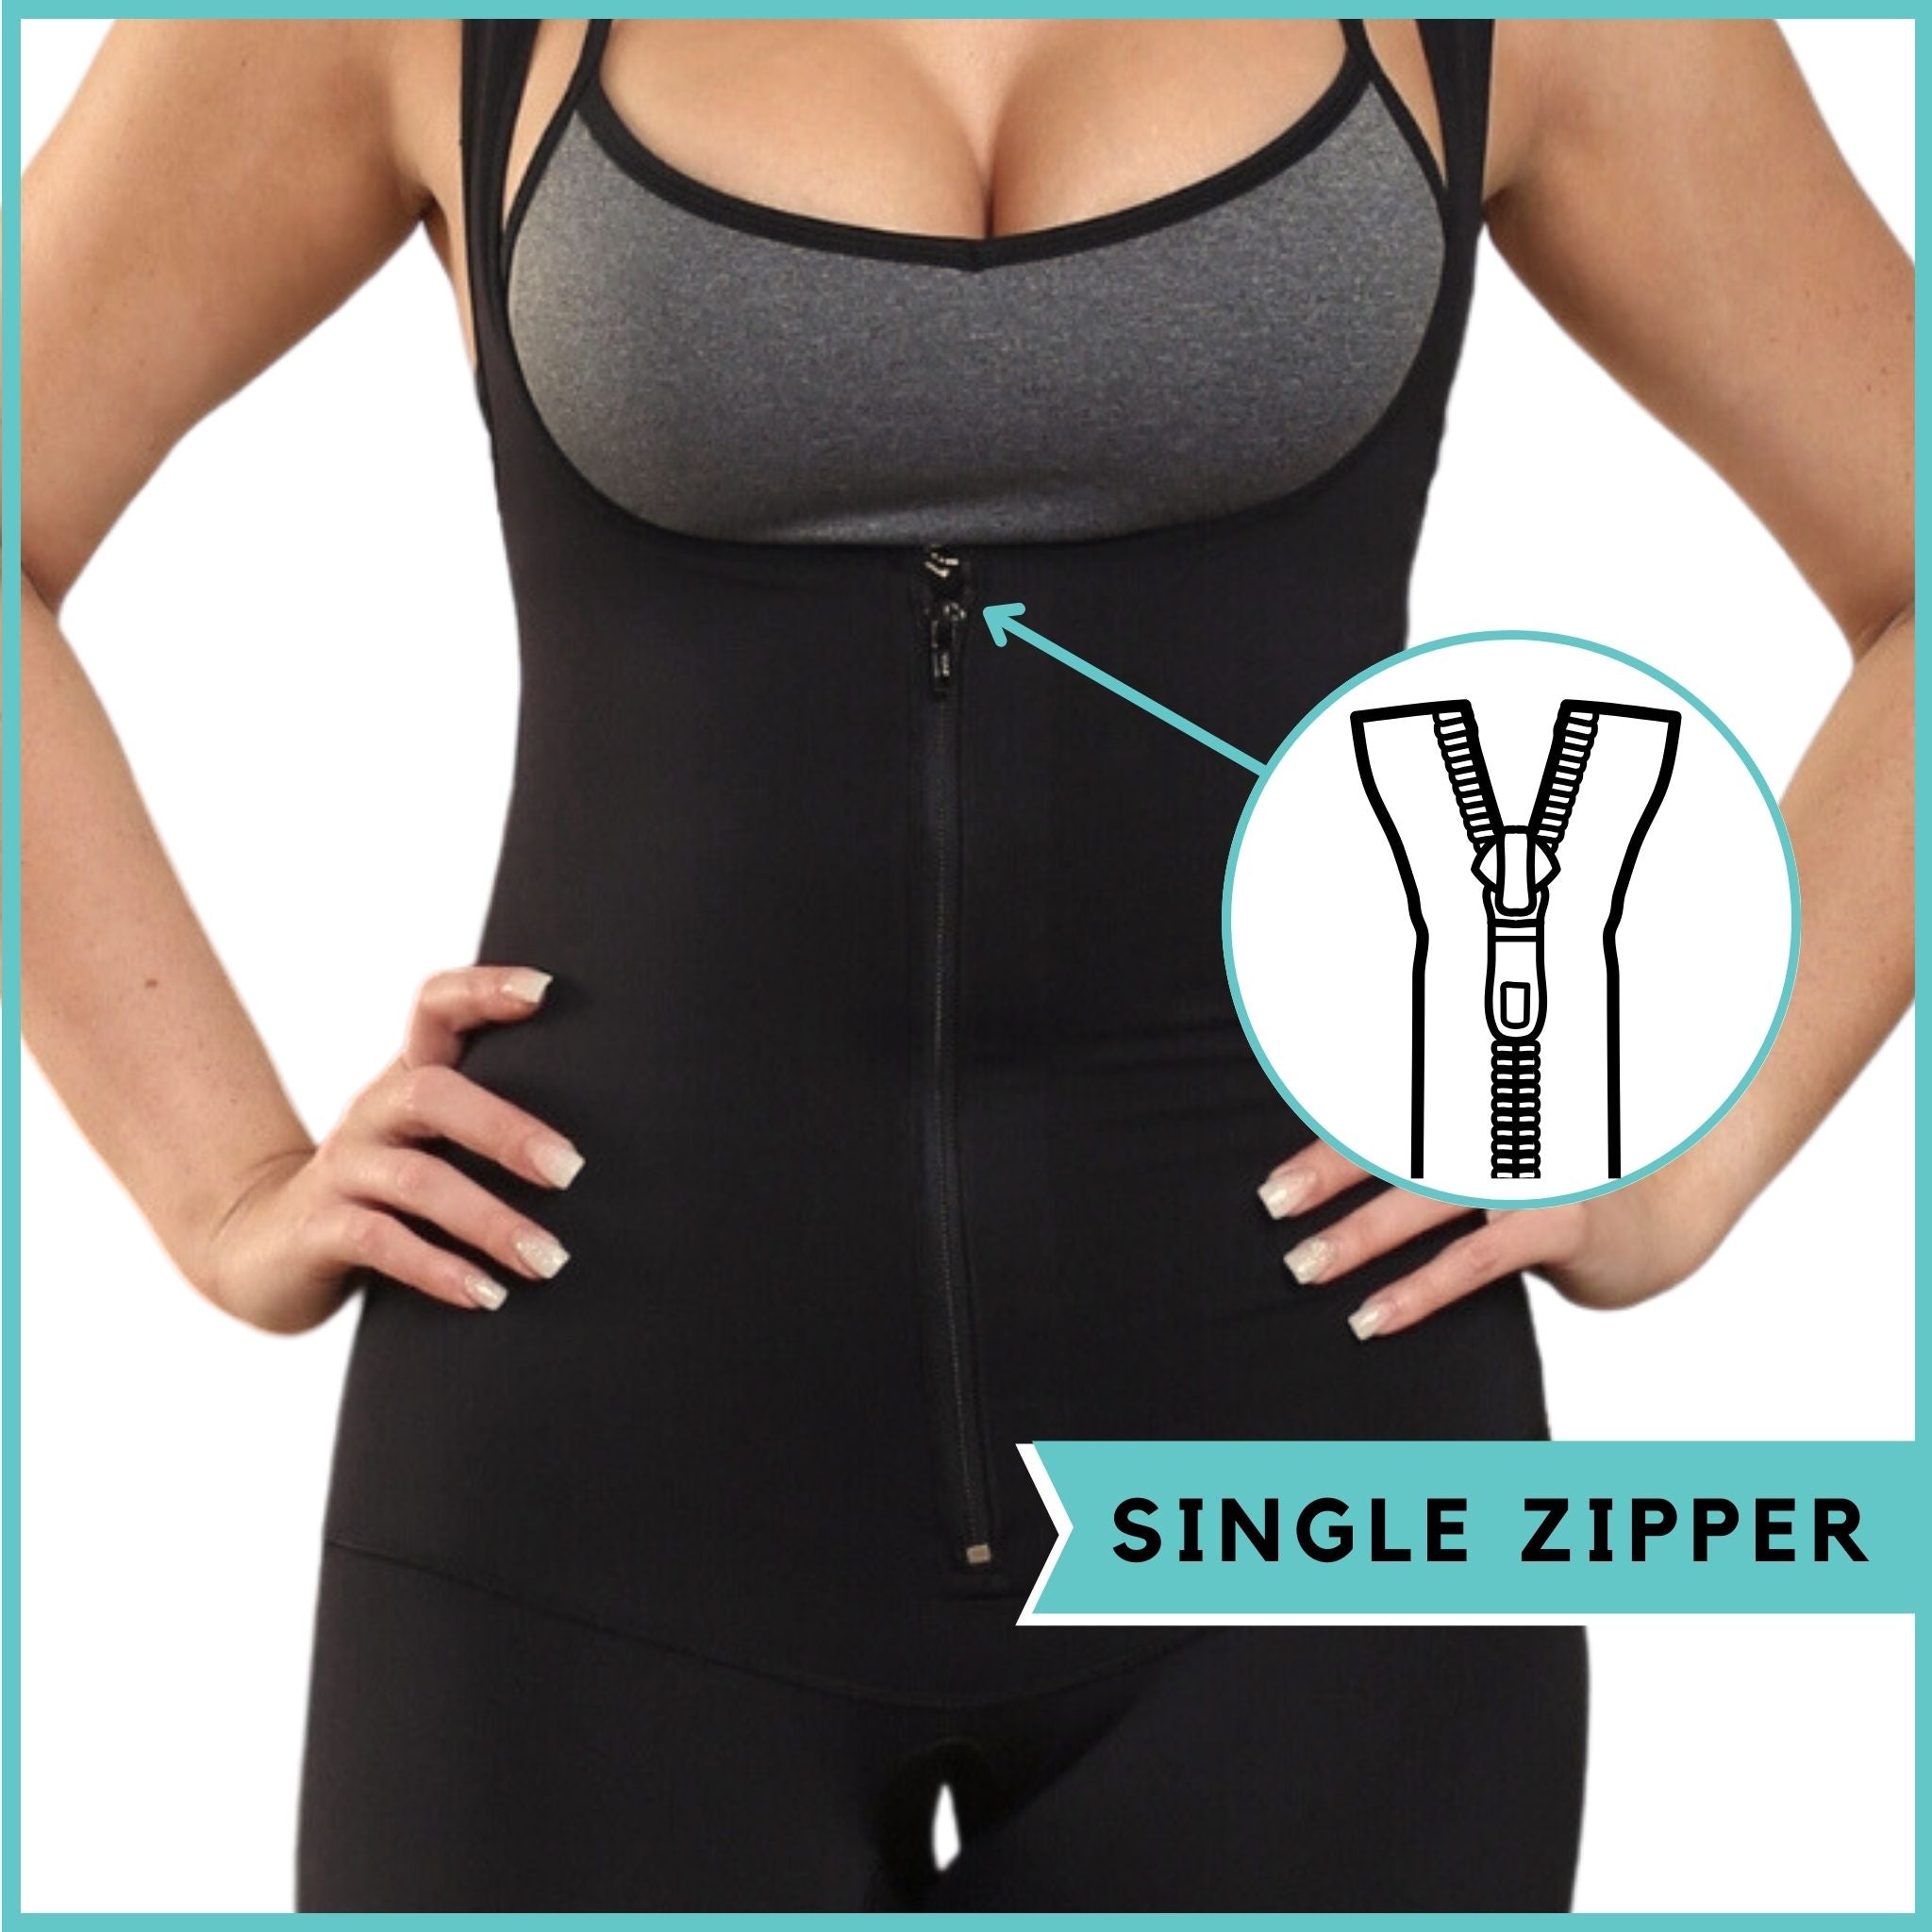 Post Surgery Recovery Garment: BBL, Liposuction, & Tummy Tuck Recovery –  Dr. Shape